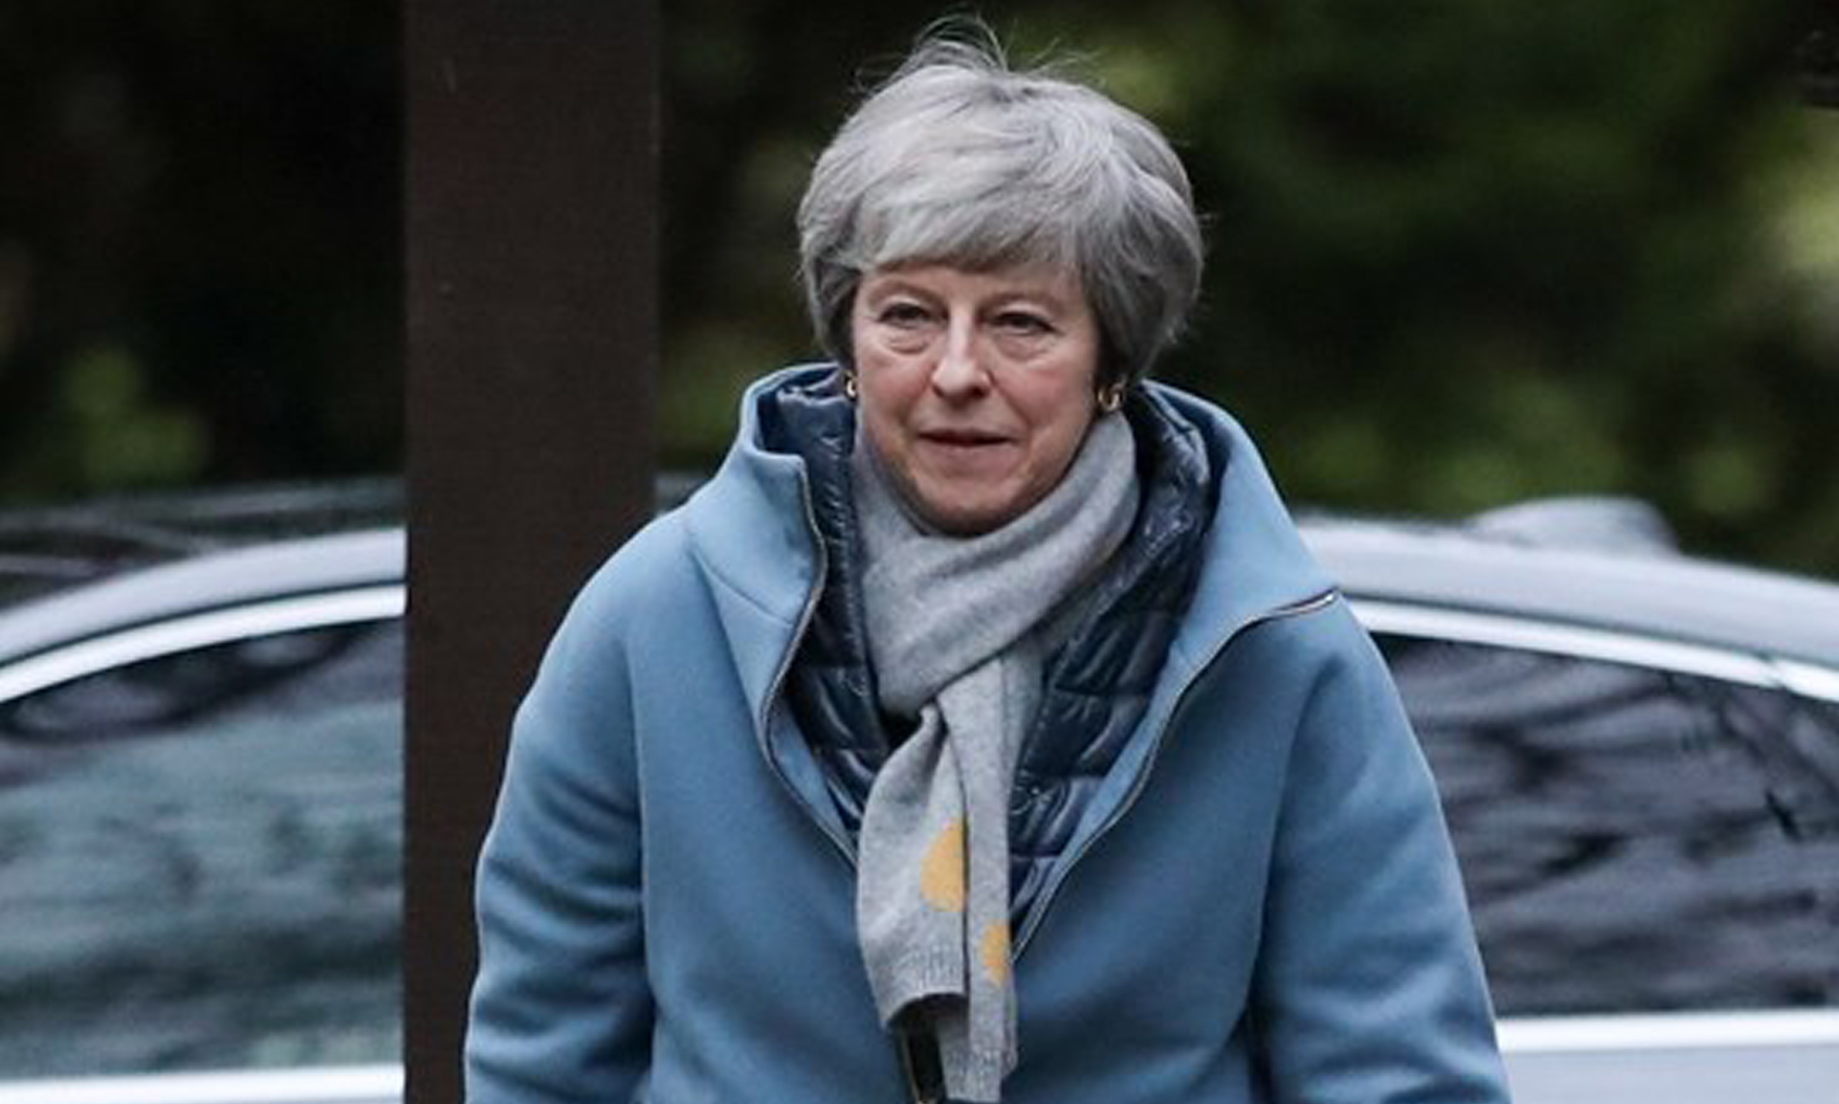 No Brussels breakthrough for May after day of defections